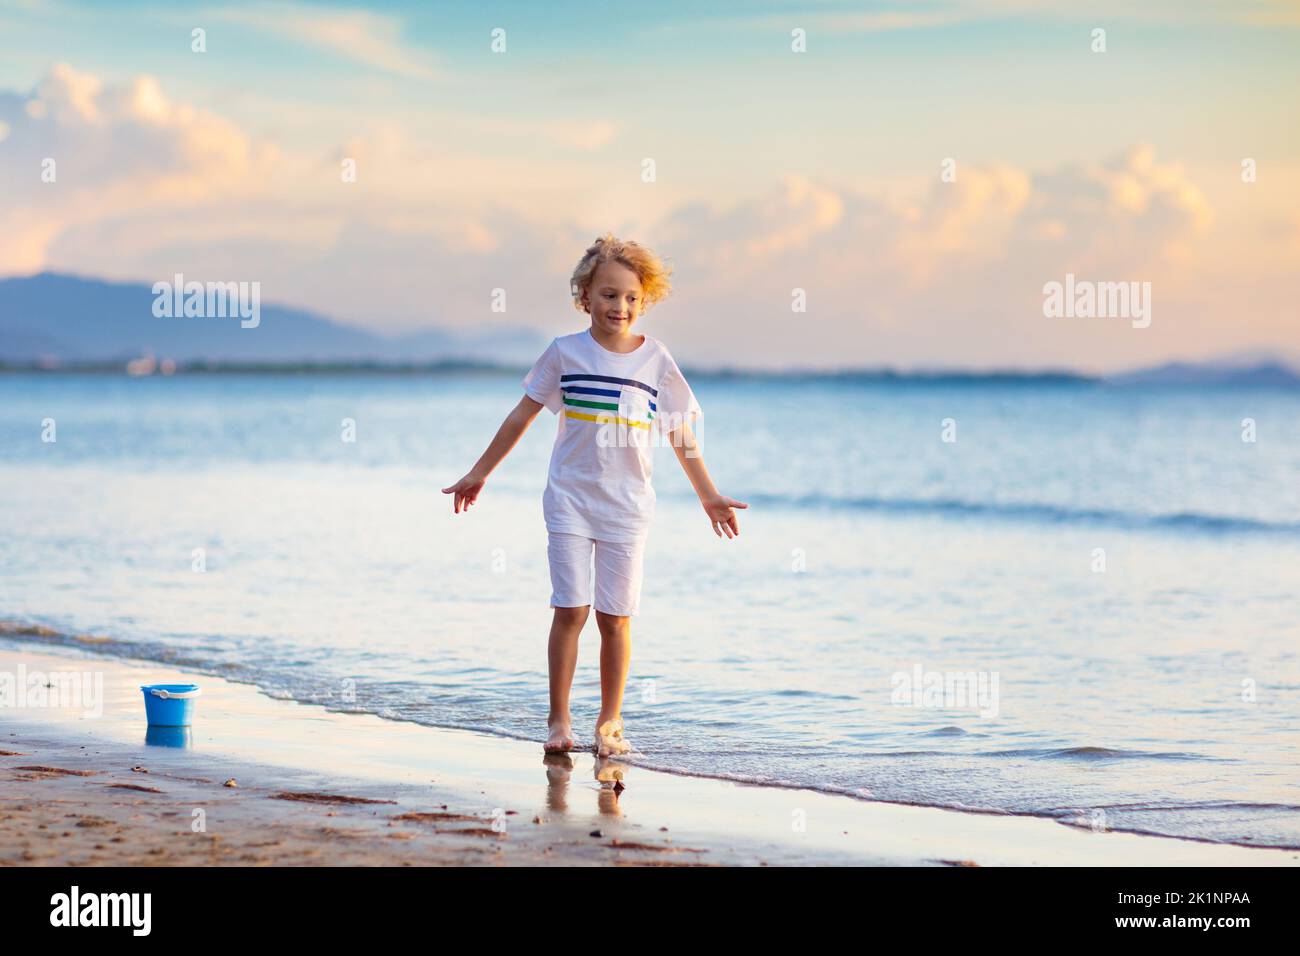 Child playing on tropical beach. Little boy at sea shore. Family summer vacation. Kids play with water and sand toys. Ocean and island fun. Travel wit Stock Photo